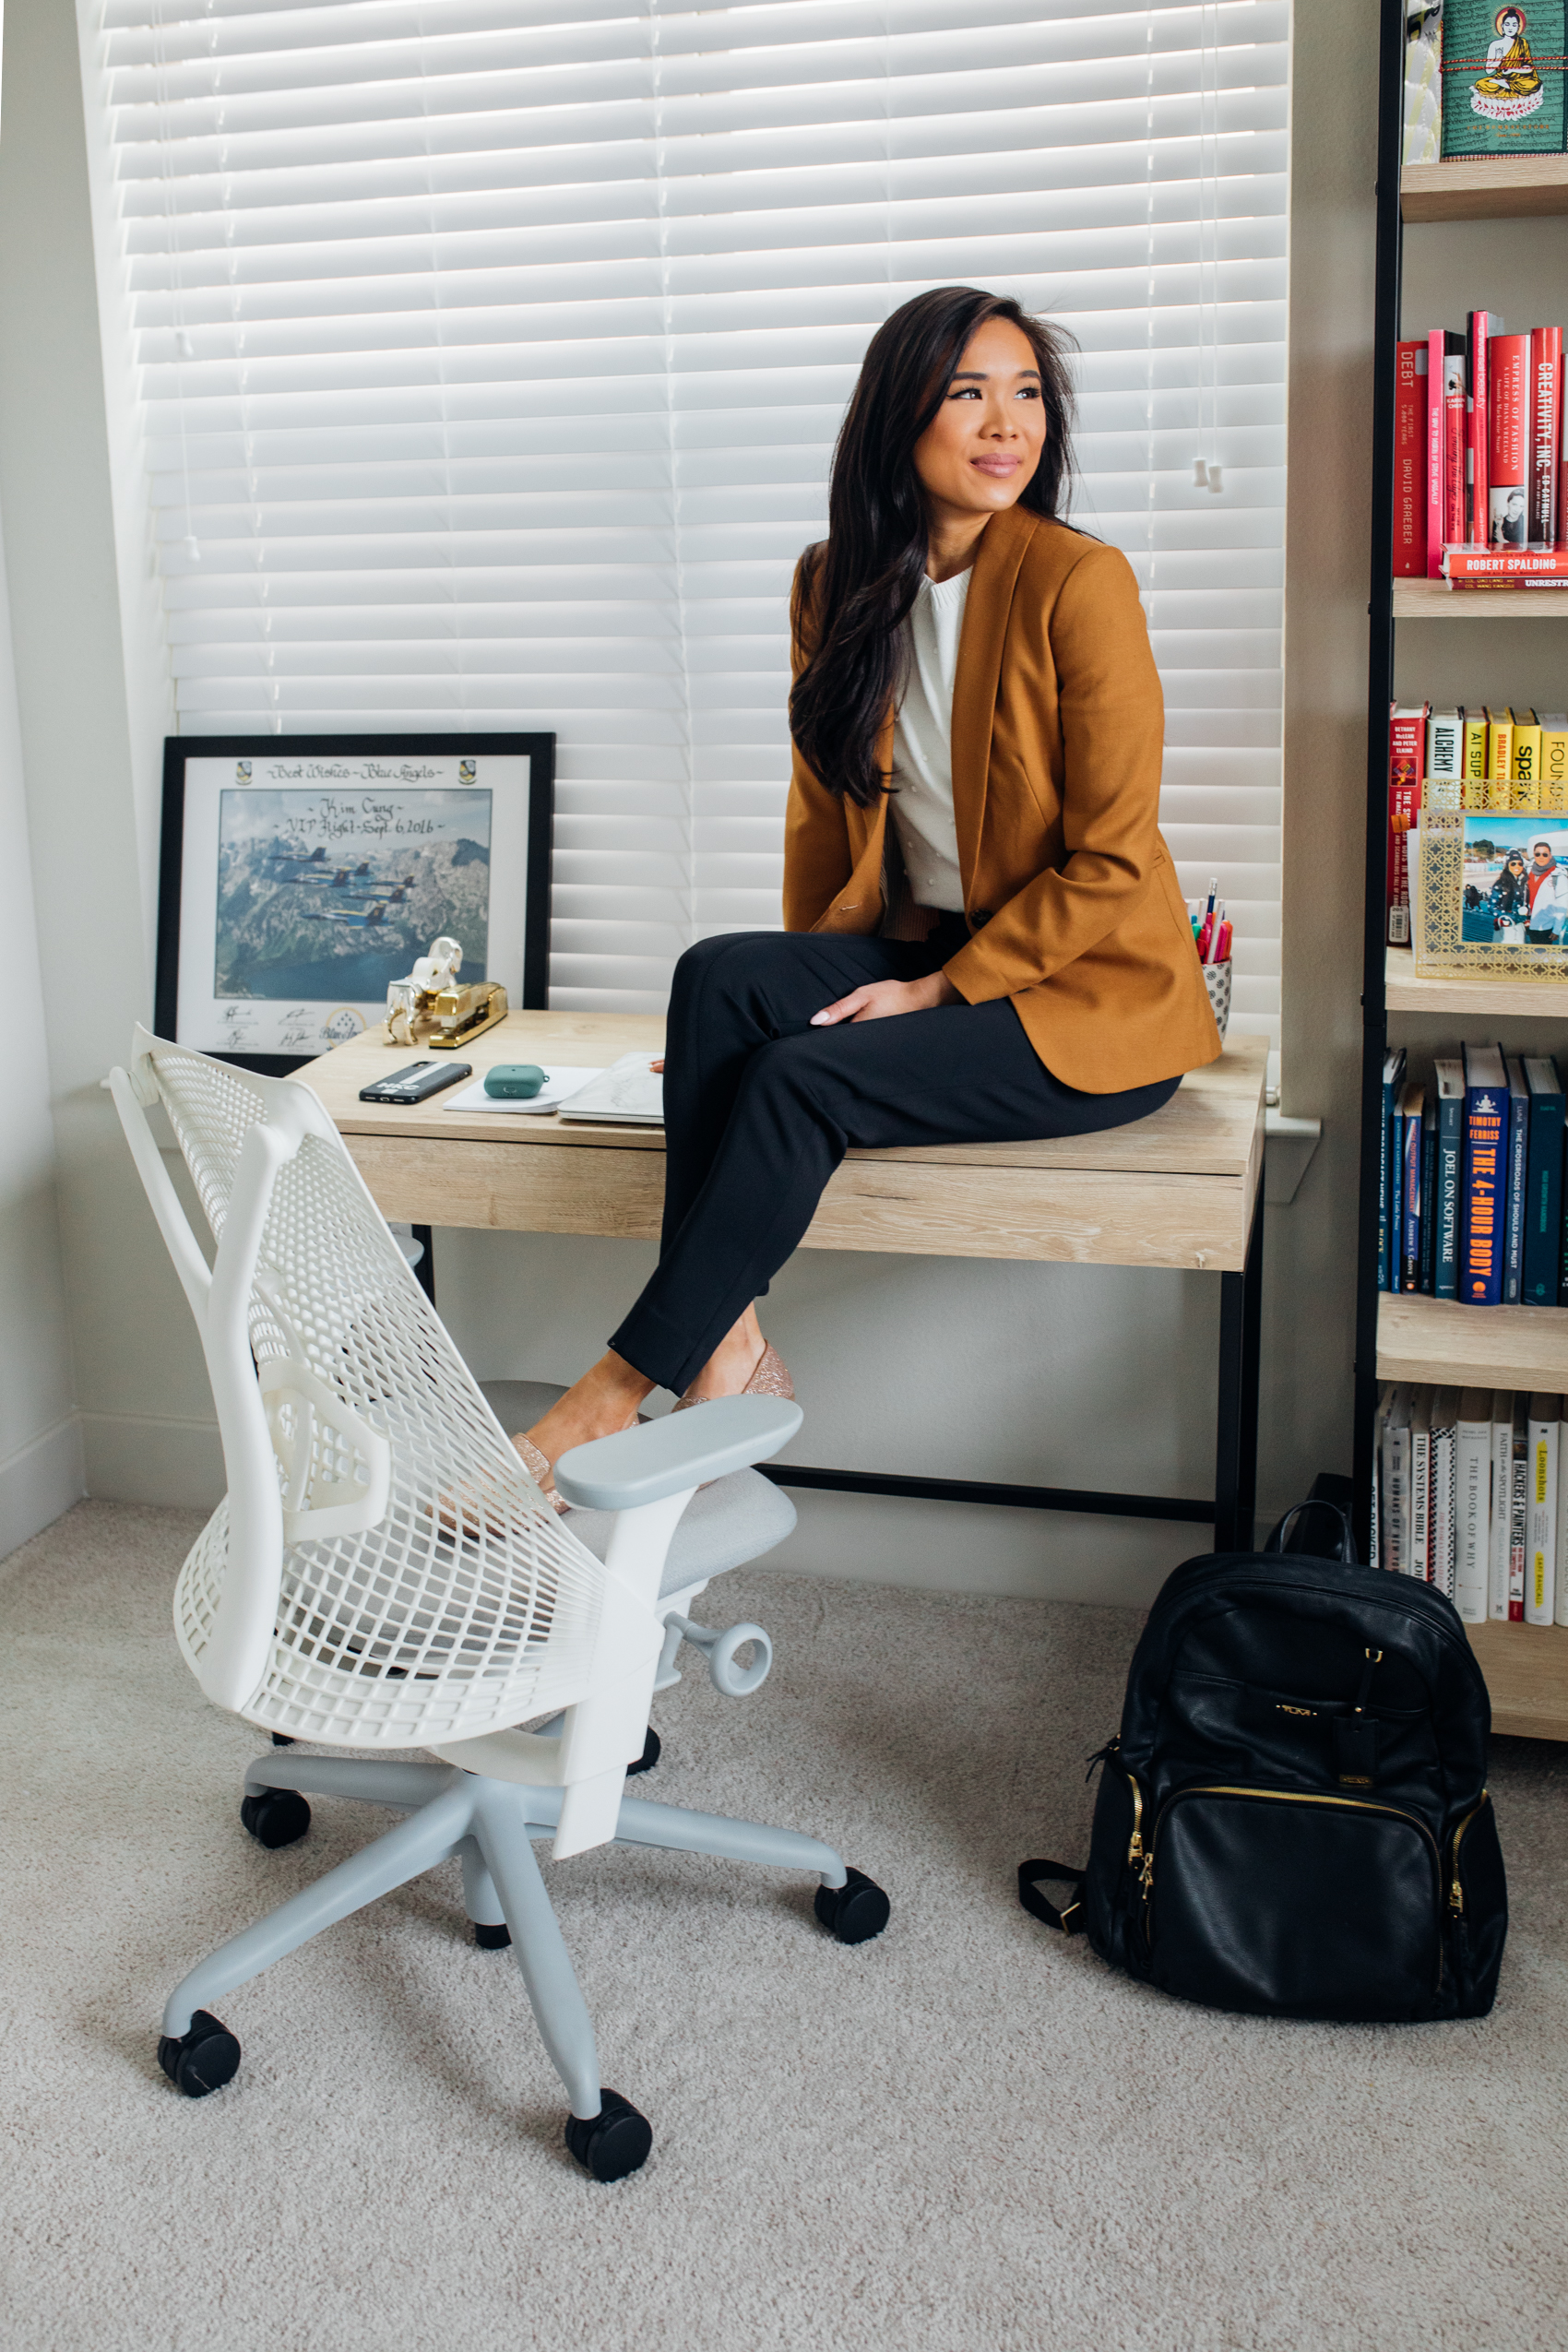 Blogger Hoang-Kim in her Dallas apartment home office with a writing desk, Herman Miller Sayl Chair in white, Tumi leather backpack, wearing J.Crew Parke Blazer, Ann Taylor Popcorn Sweater, M.M. LaFleur Scuba Pants and Birdies flats